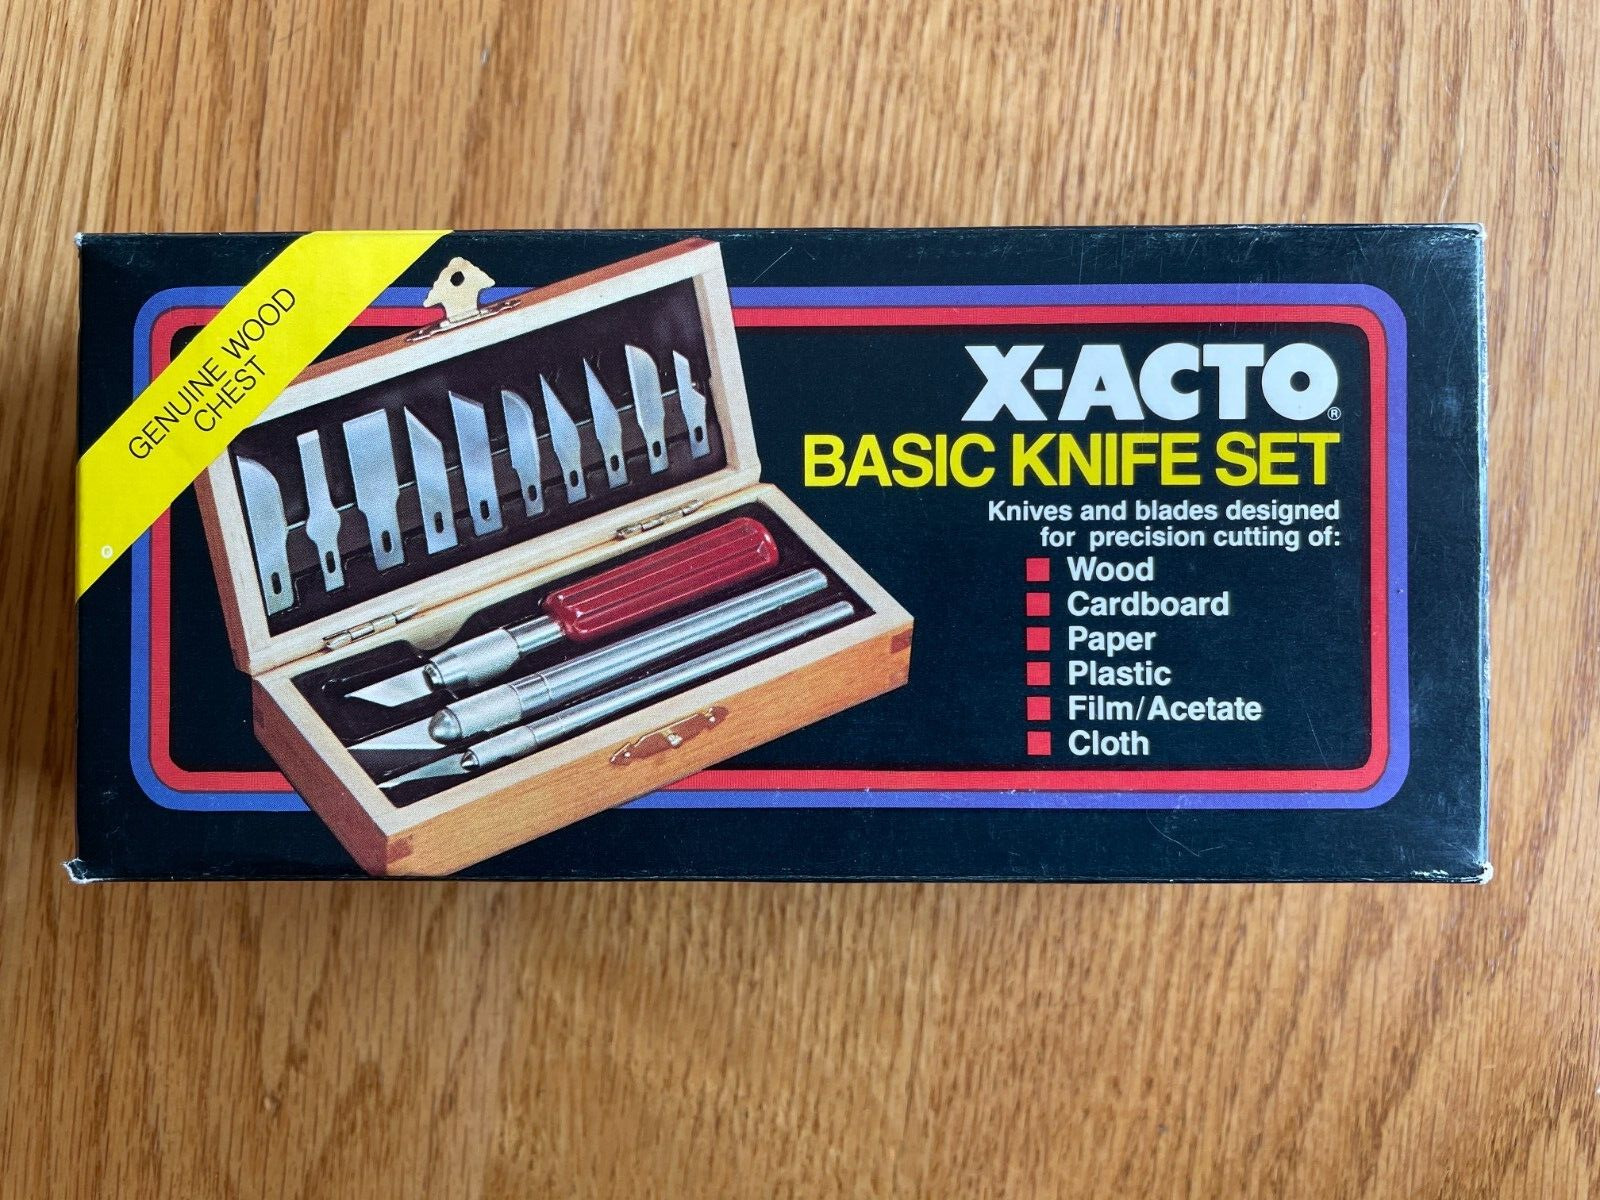 Vtg 1989 X-ACTO Basic Knife Set in Wooden Box, 3 Handles 13 Blades New Old Stock